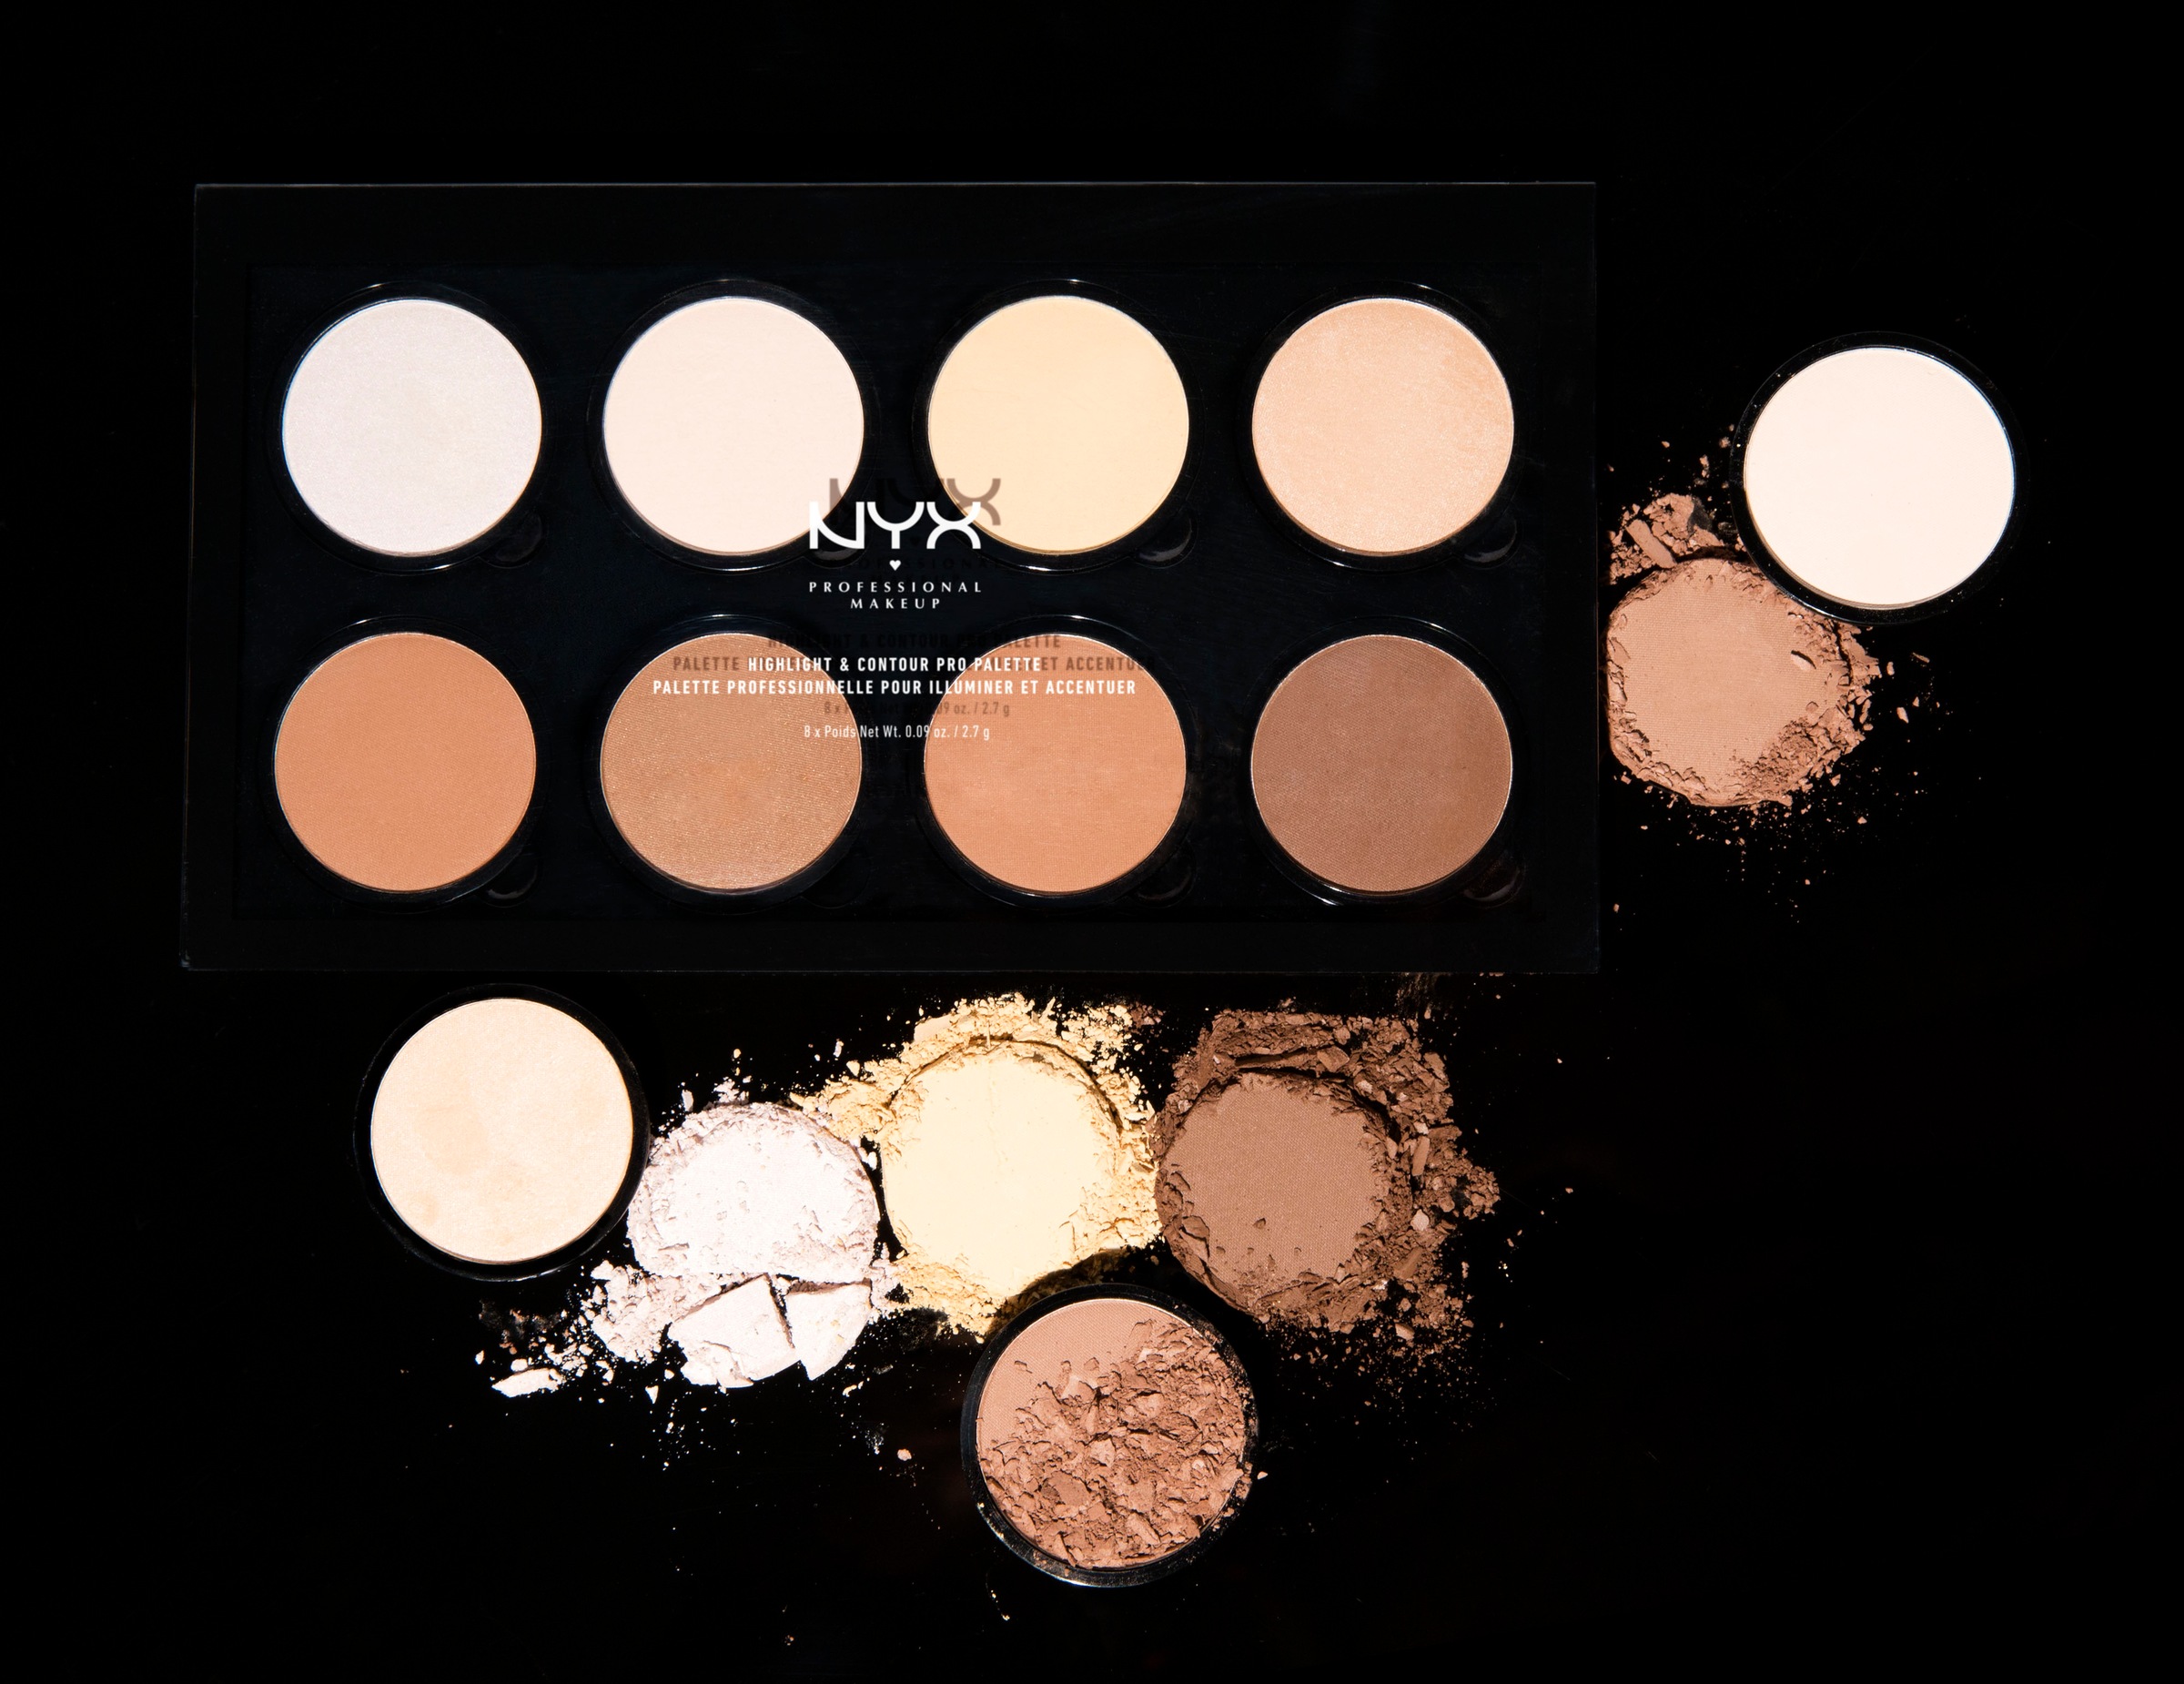 NYX Highlighter »NYX Professional Makeup Highlight & Contour Pro Palette«